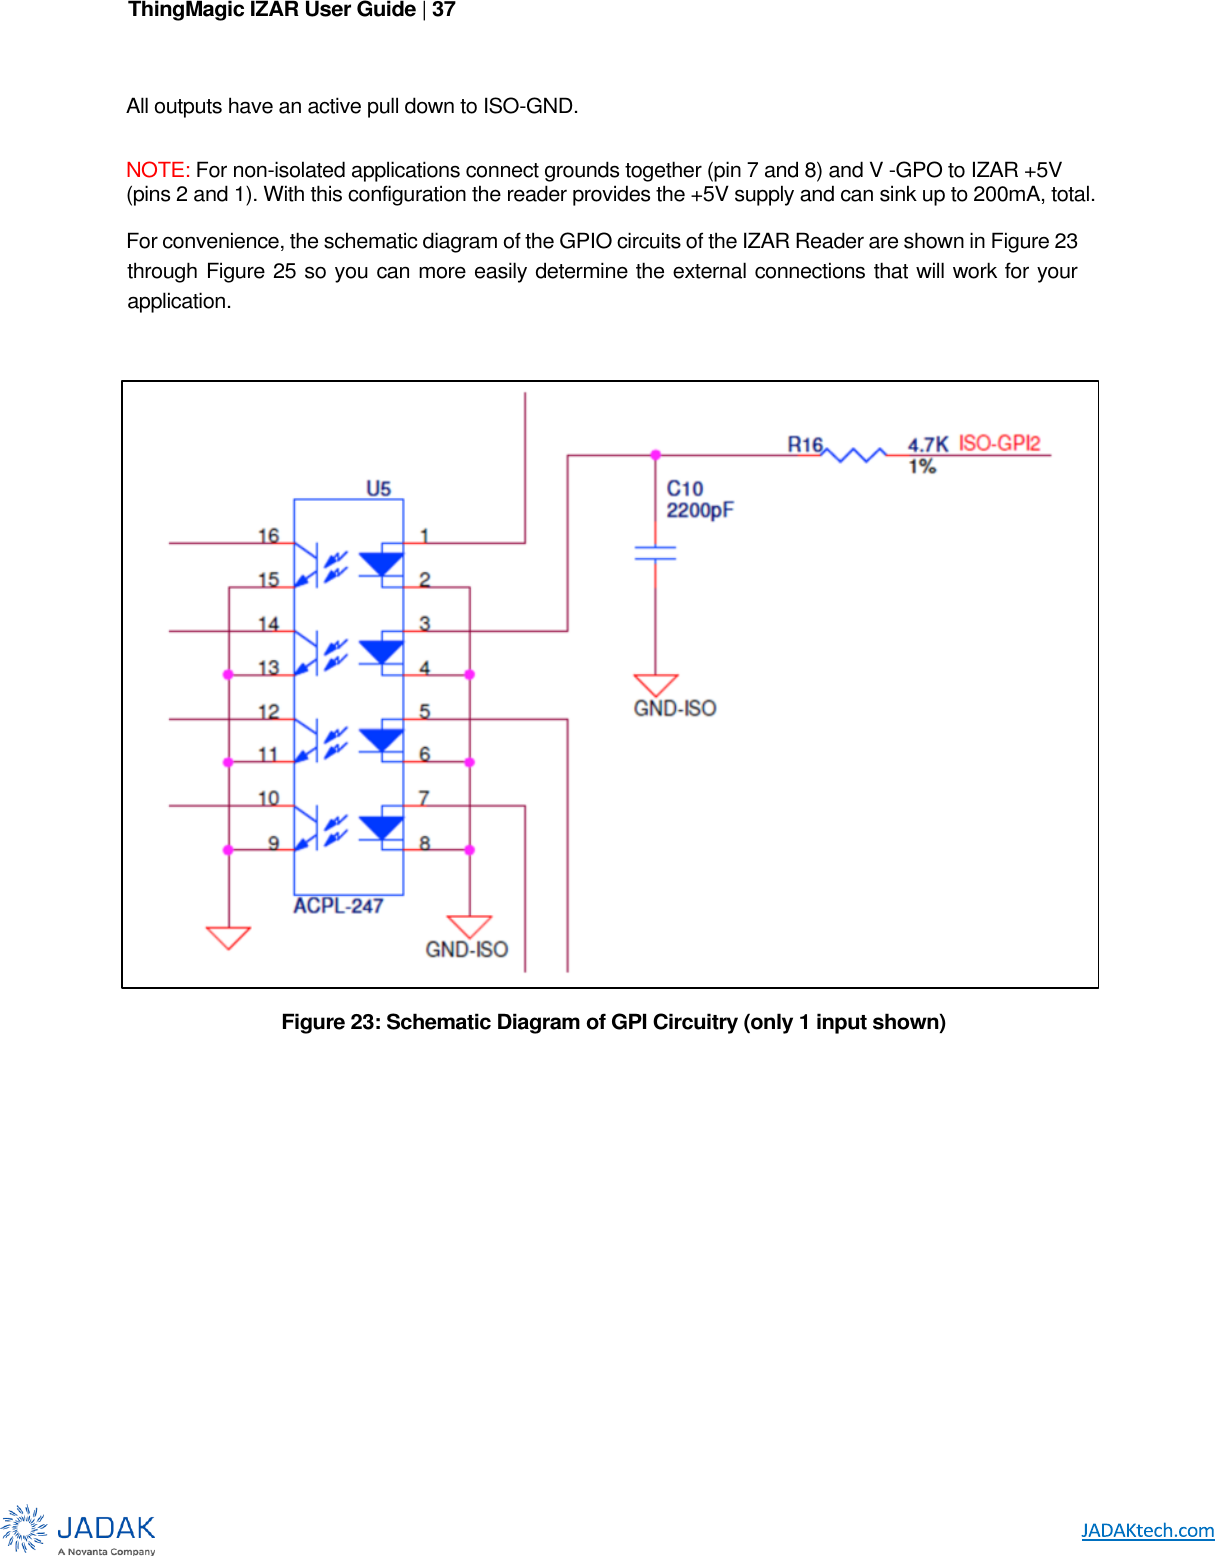 ThingMagic IZAR User Guide | 37       All outputs have an active pull down to ISO-GND.  NOTE: For non-isolated applications connect grounds together (pin 7 and 8) and V -GPO to IZAR +5V (pins 2 and 1). With this configuration the reader provides the +5V supply and can sink up to 200mA, total.  For convenience, the schematic diagram of the GPIO circuits of the IZAR Reader are shown in Figure 23 through Figure 25 so you can more easily determine the external connections that will work for your application.   Figure 23: Schematic Diagram of GPI Circuitry (only 1 input shown) 